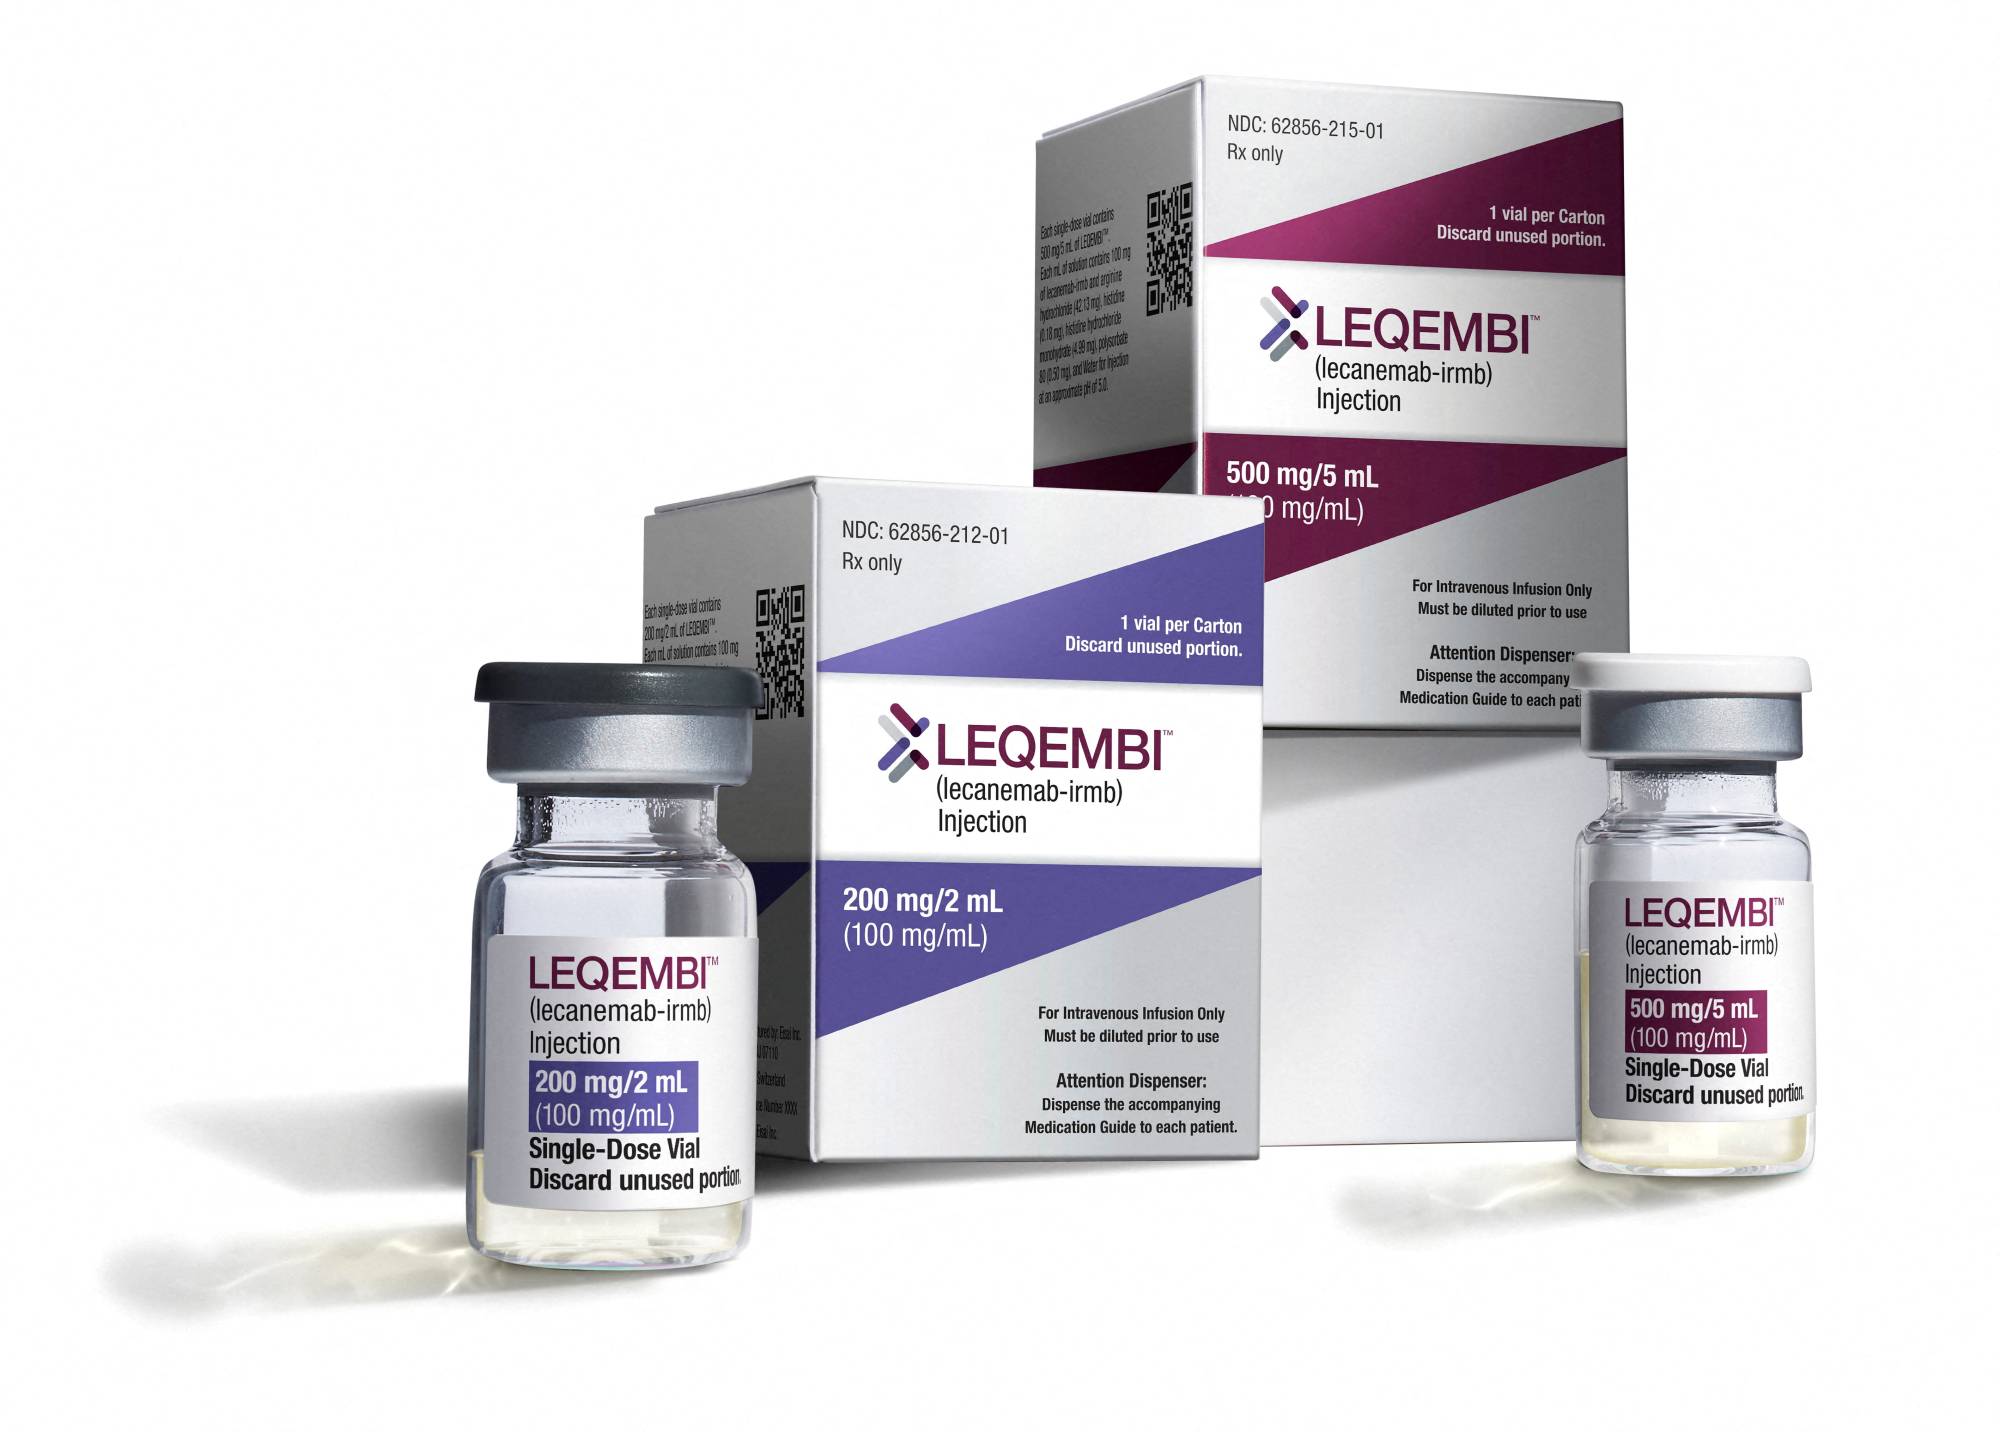 In Japan, Leqembi is undergoing priority review by the Pharmaceuticals and Medical Devices Agency, which means it could be approved in the country as early as this fall. | EISAI / VIA REUTERS